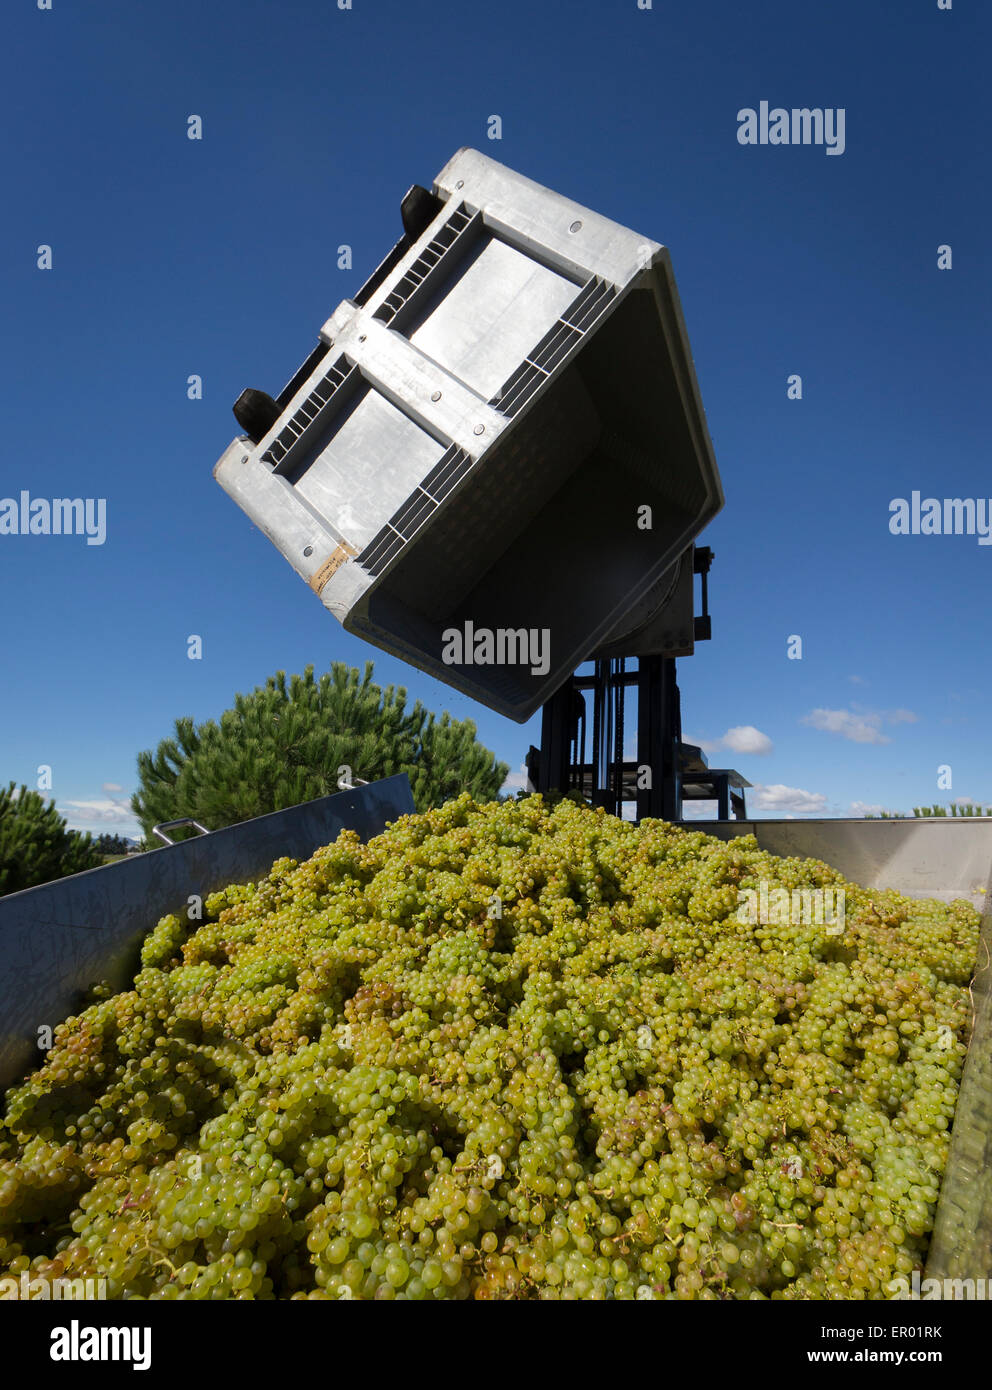 Chardonnay grapes being collected and sorted prior to pressing for Moana sparkling wine Stock Photo